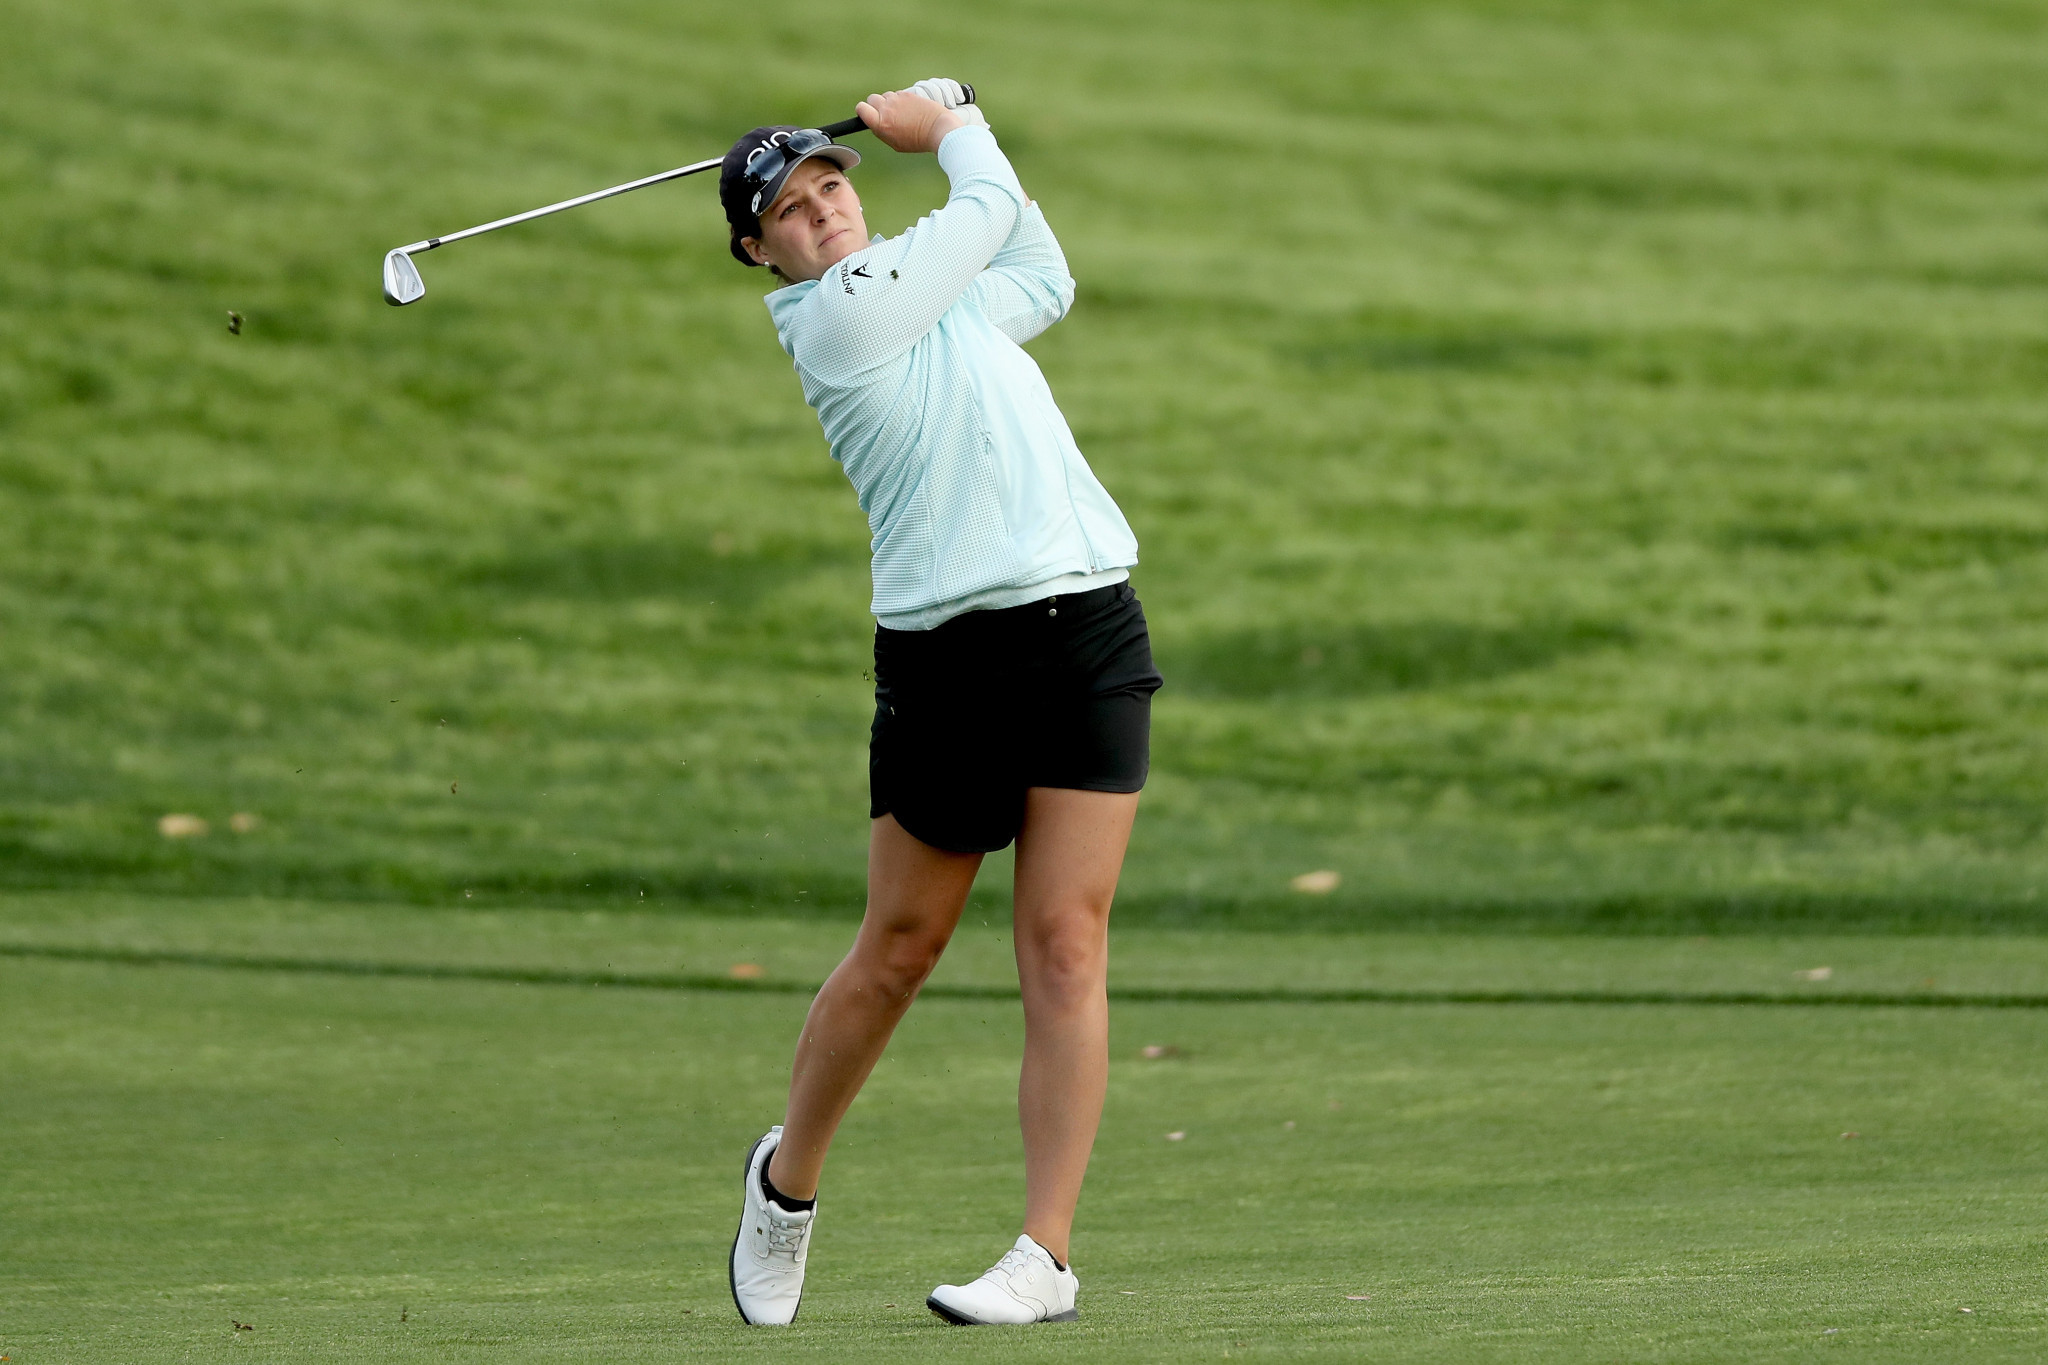 McDonald shoots four-under-par 68 in opening round to lead ANA Inspiration 